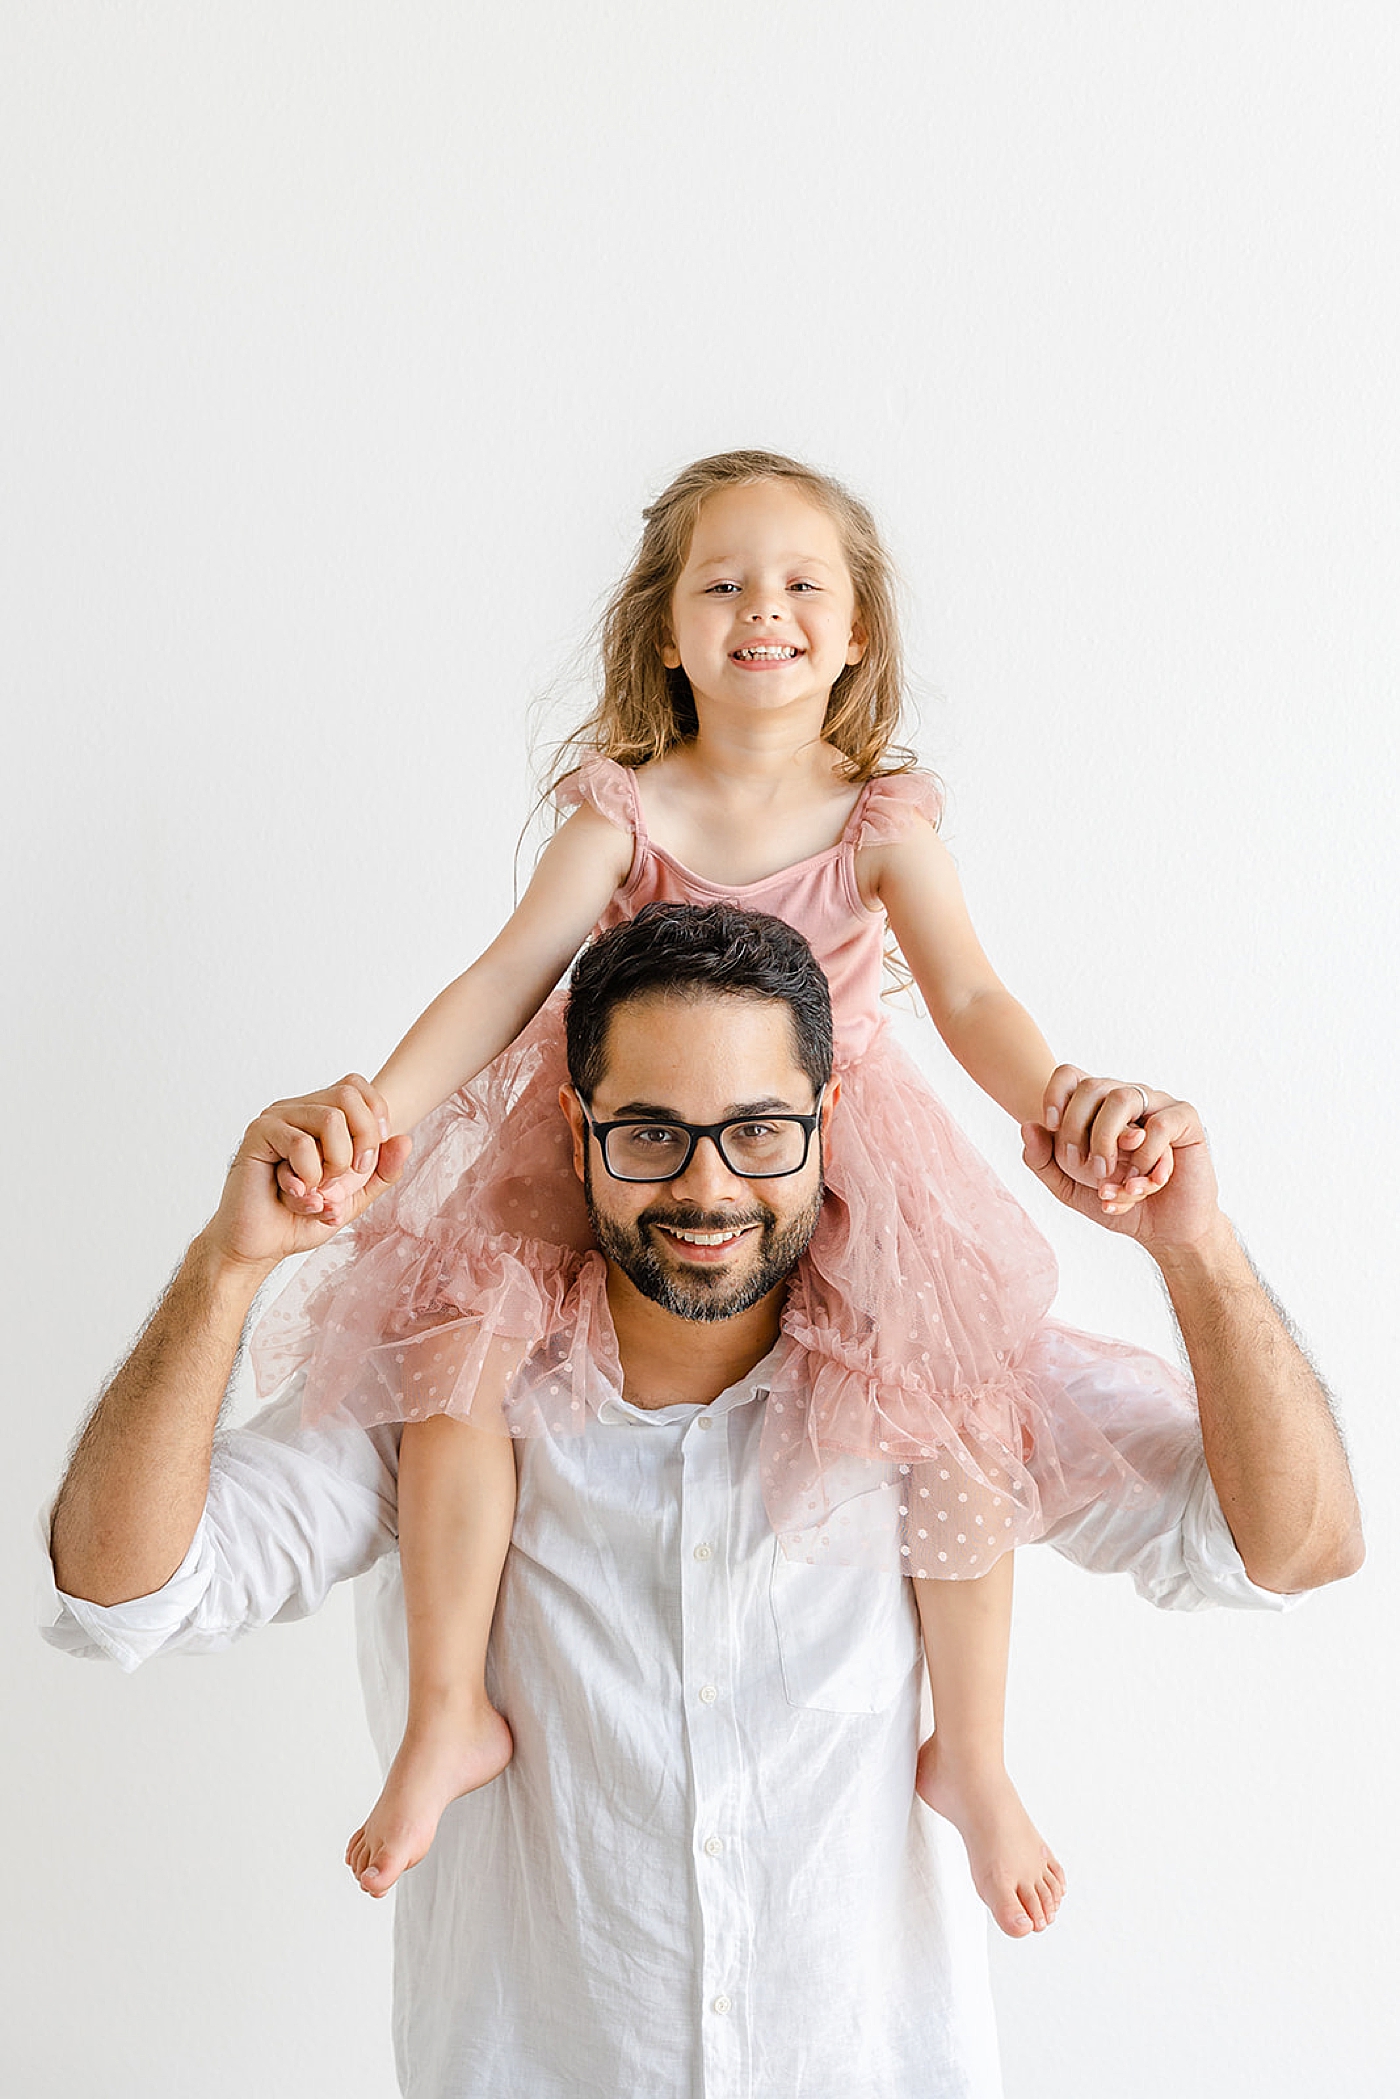 Dad with his daughter in pink on his shoulders | Image by Sana Ahmed Photography